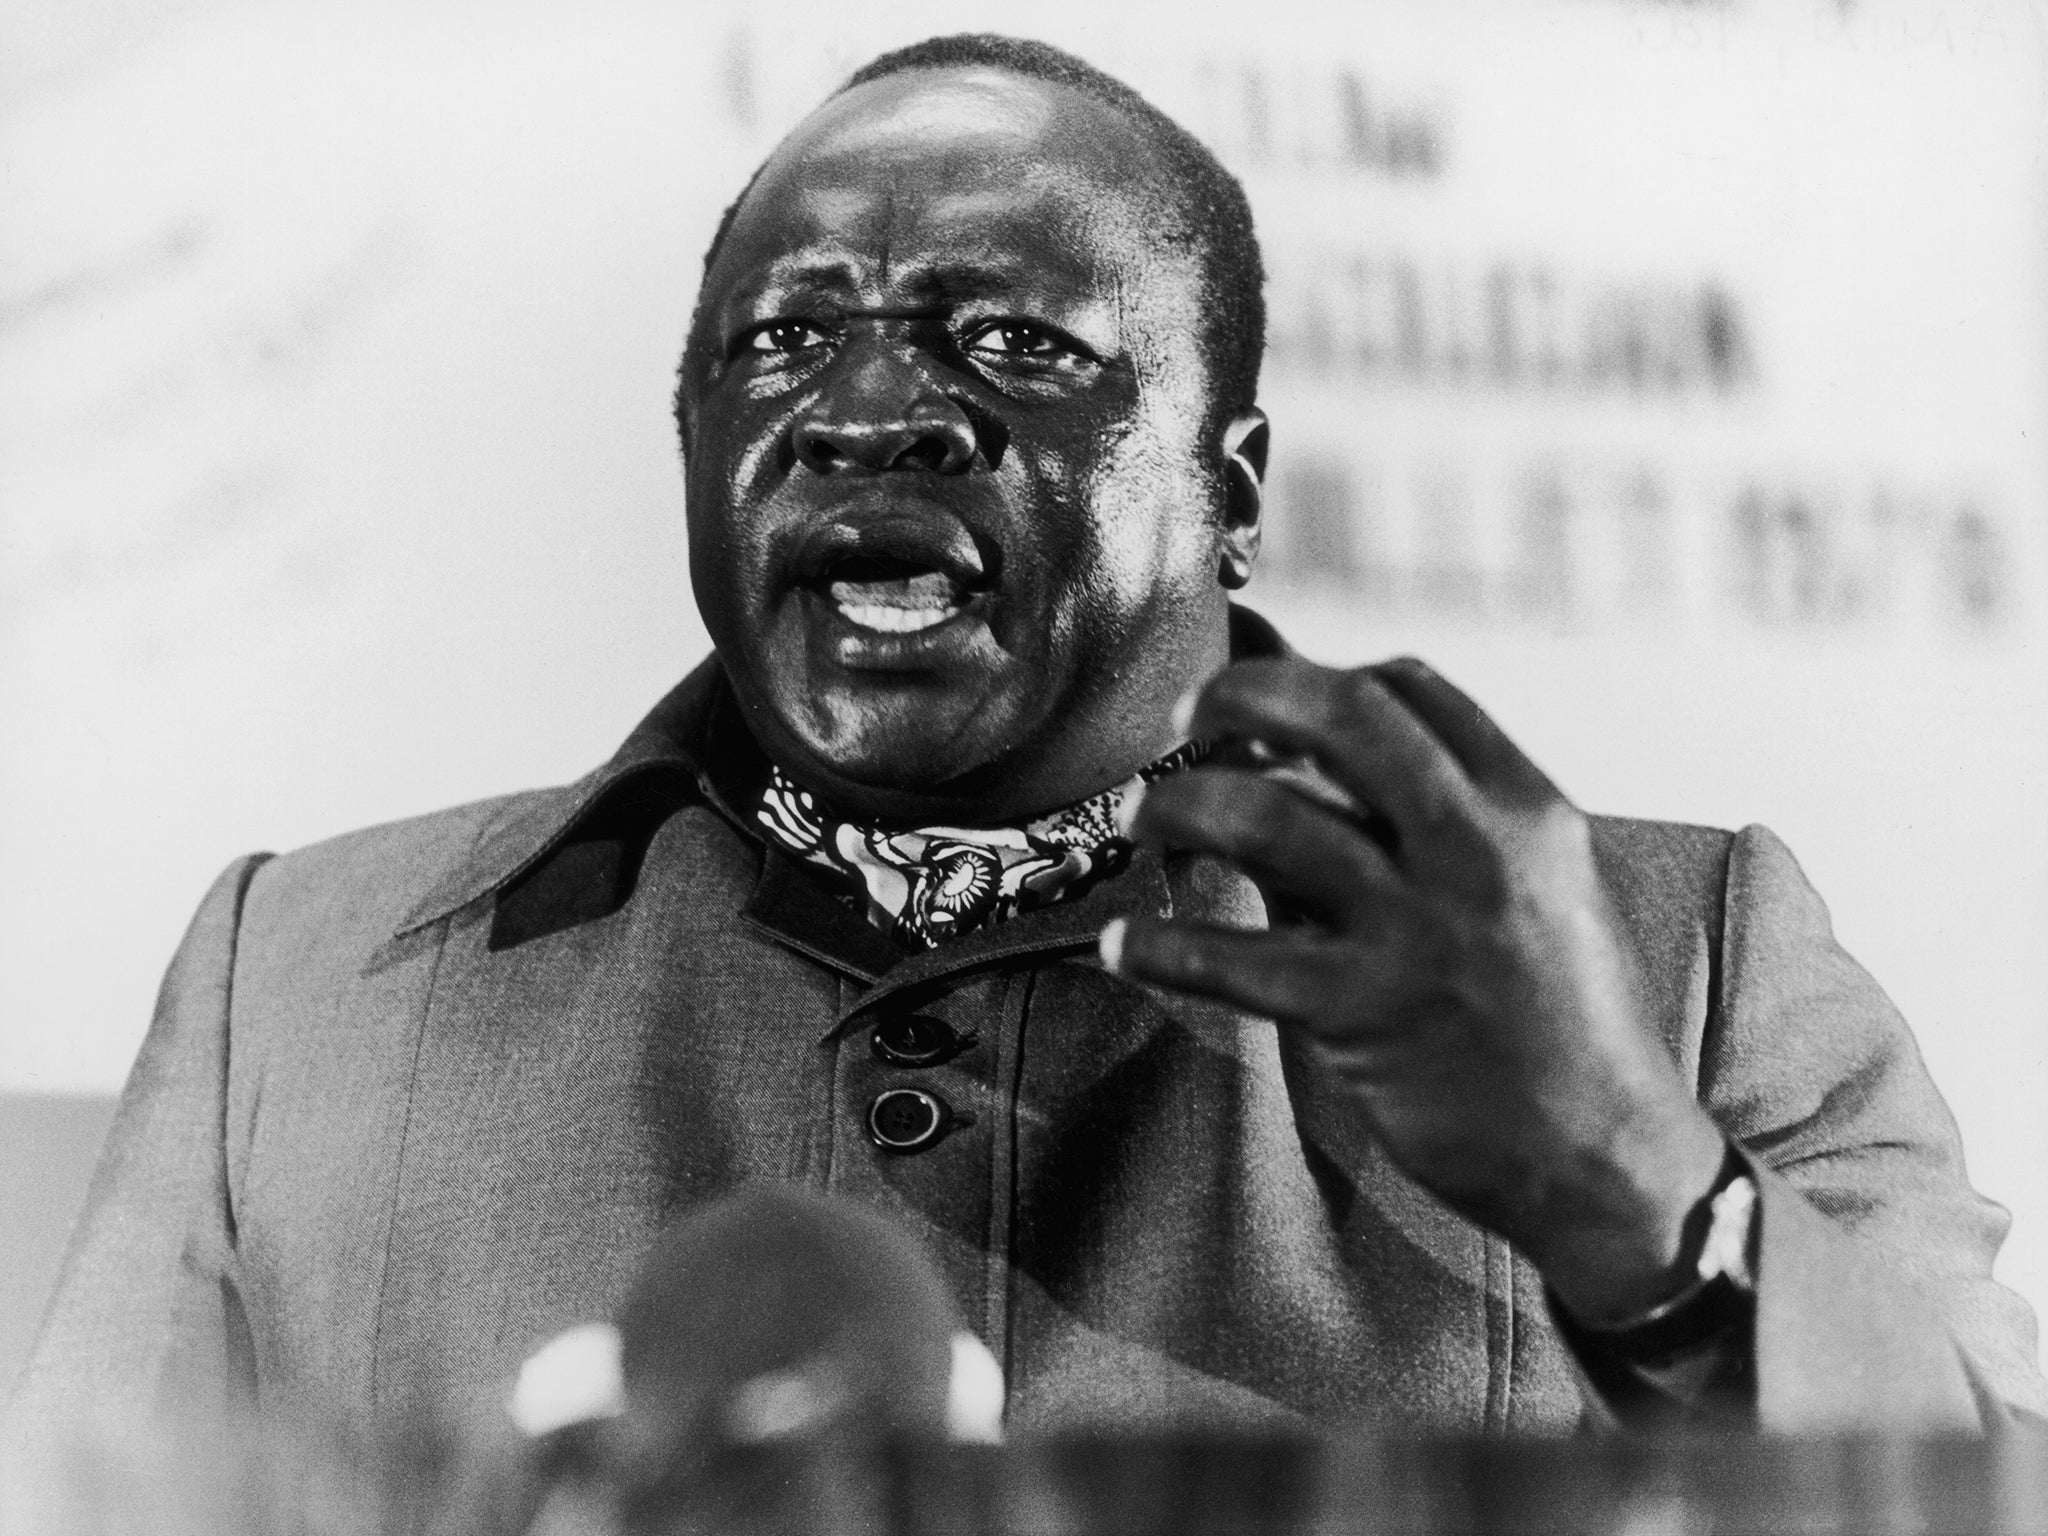 Ugandan leader Idi Amin set a deadline of 90 days for the expulsion of most of the country’s Asians in 1972